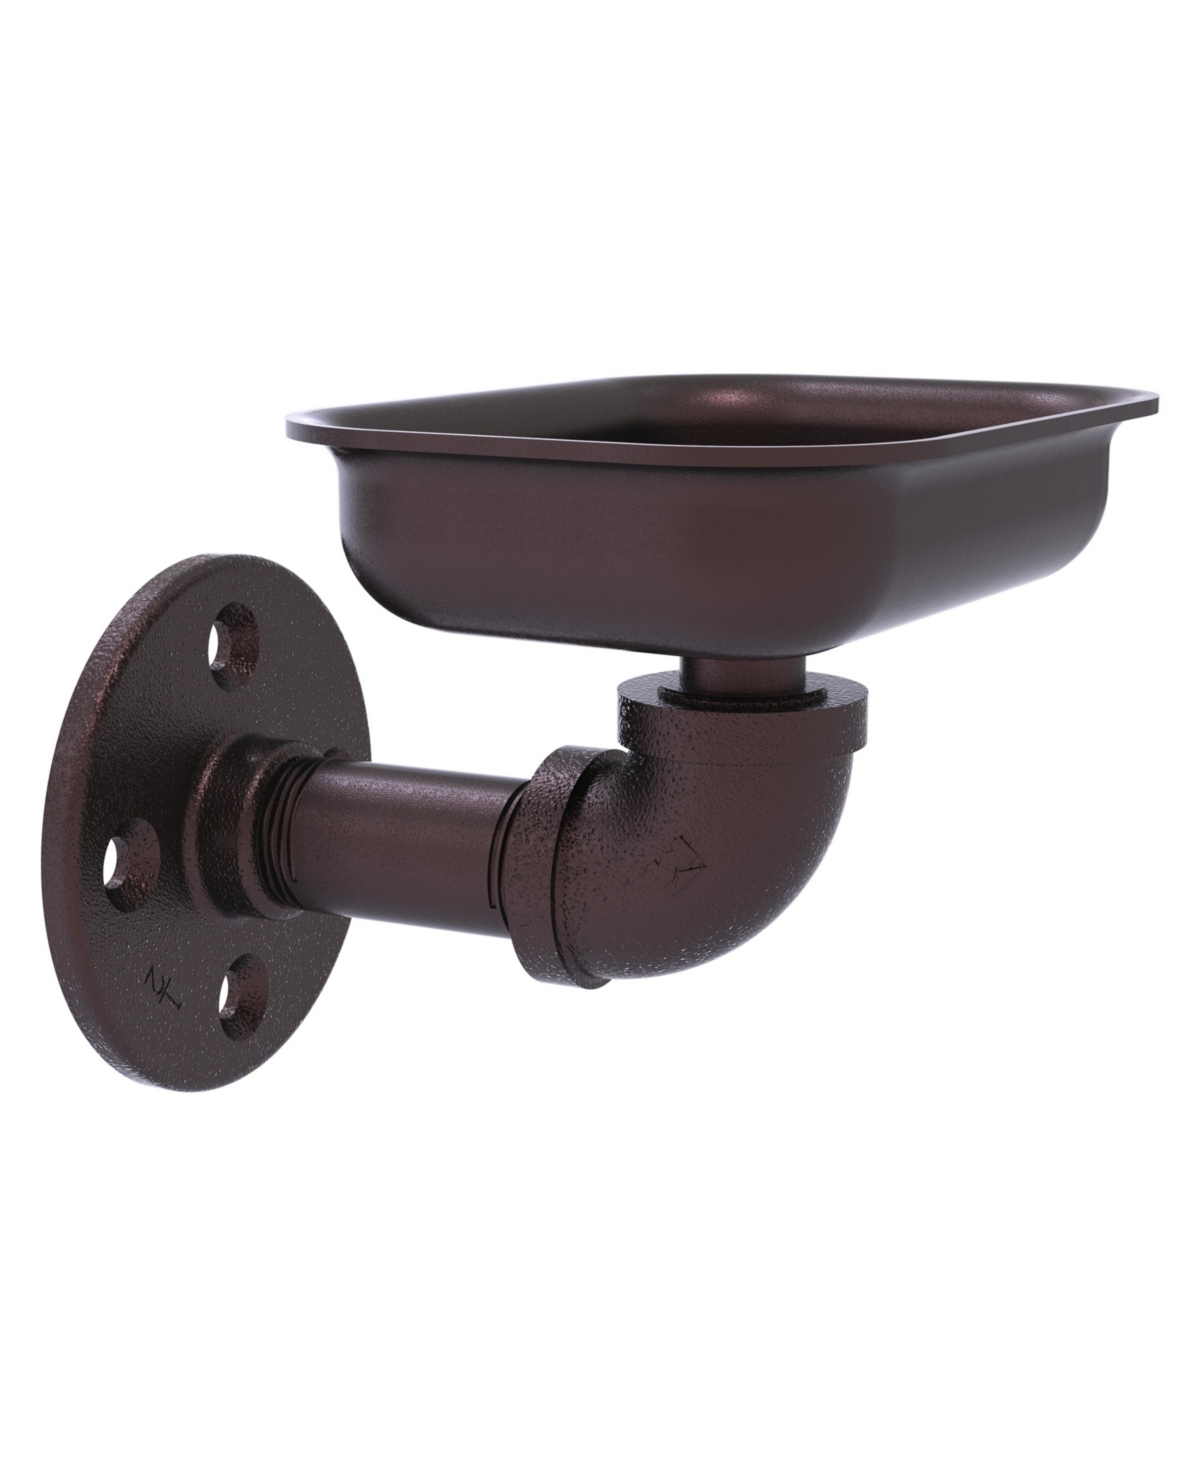 15905890 Pipeline Collection Wall Mounted Soap Dish sku 15905890